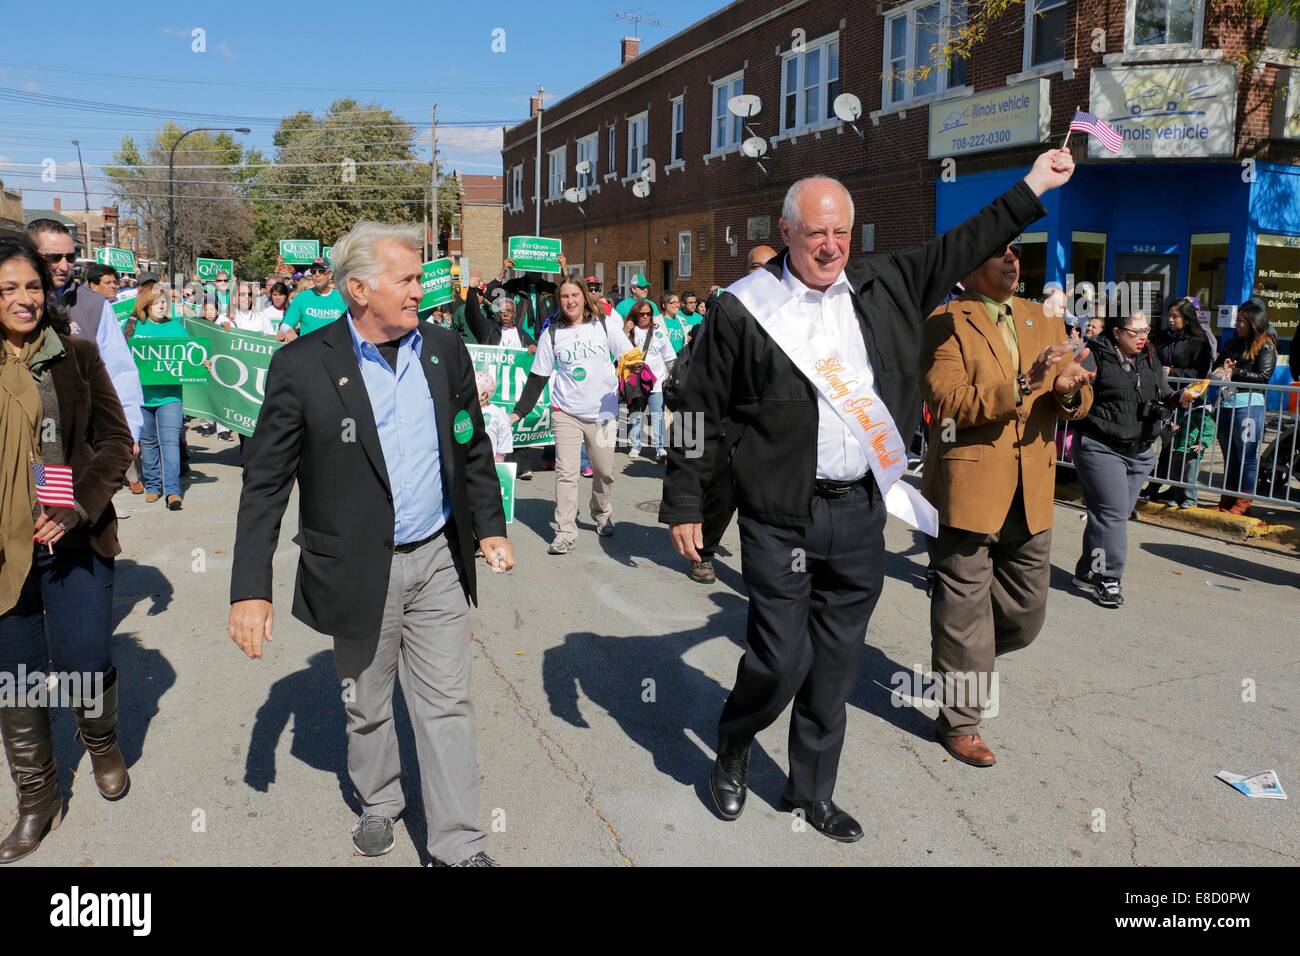 Cicero/Berwyn, Illinois, USA 5th October, 2014. Actor Martin Sheen campaigns with Governor Pat Quinn at Houby Fest. The festival is named after the Czech and Slovak word for mushroom and celebrates the many people of Czech and Slovak descent who call Cicero and Berwyn home. Mr. Sheen is famous for his portrayal of President Josiah Bartlett in the West Wing television series and numerous movie roles. Credit:  Todd Bannor/Alamy Live News Stock Photo